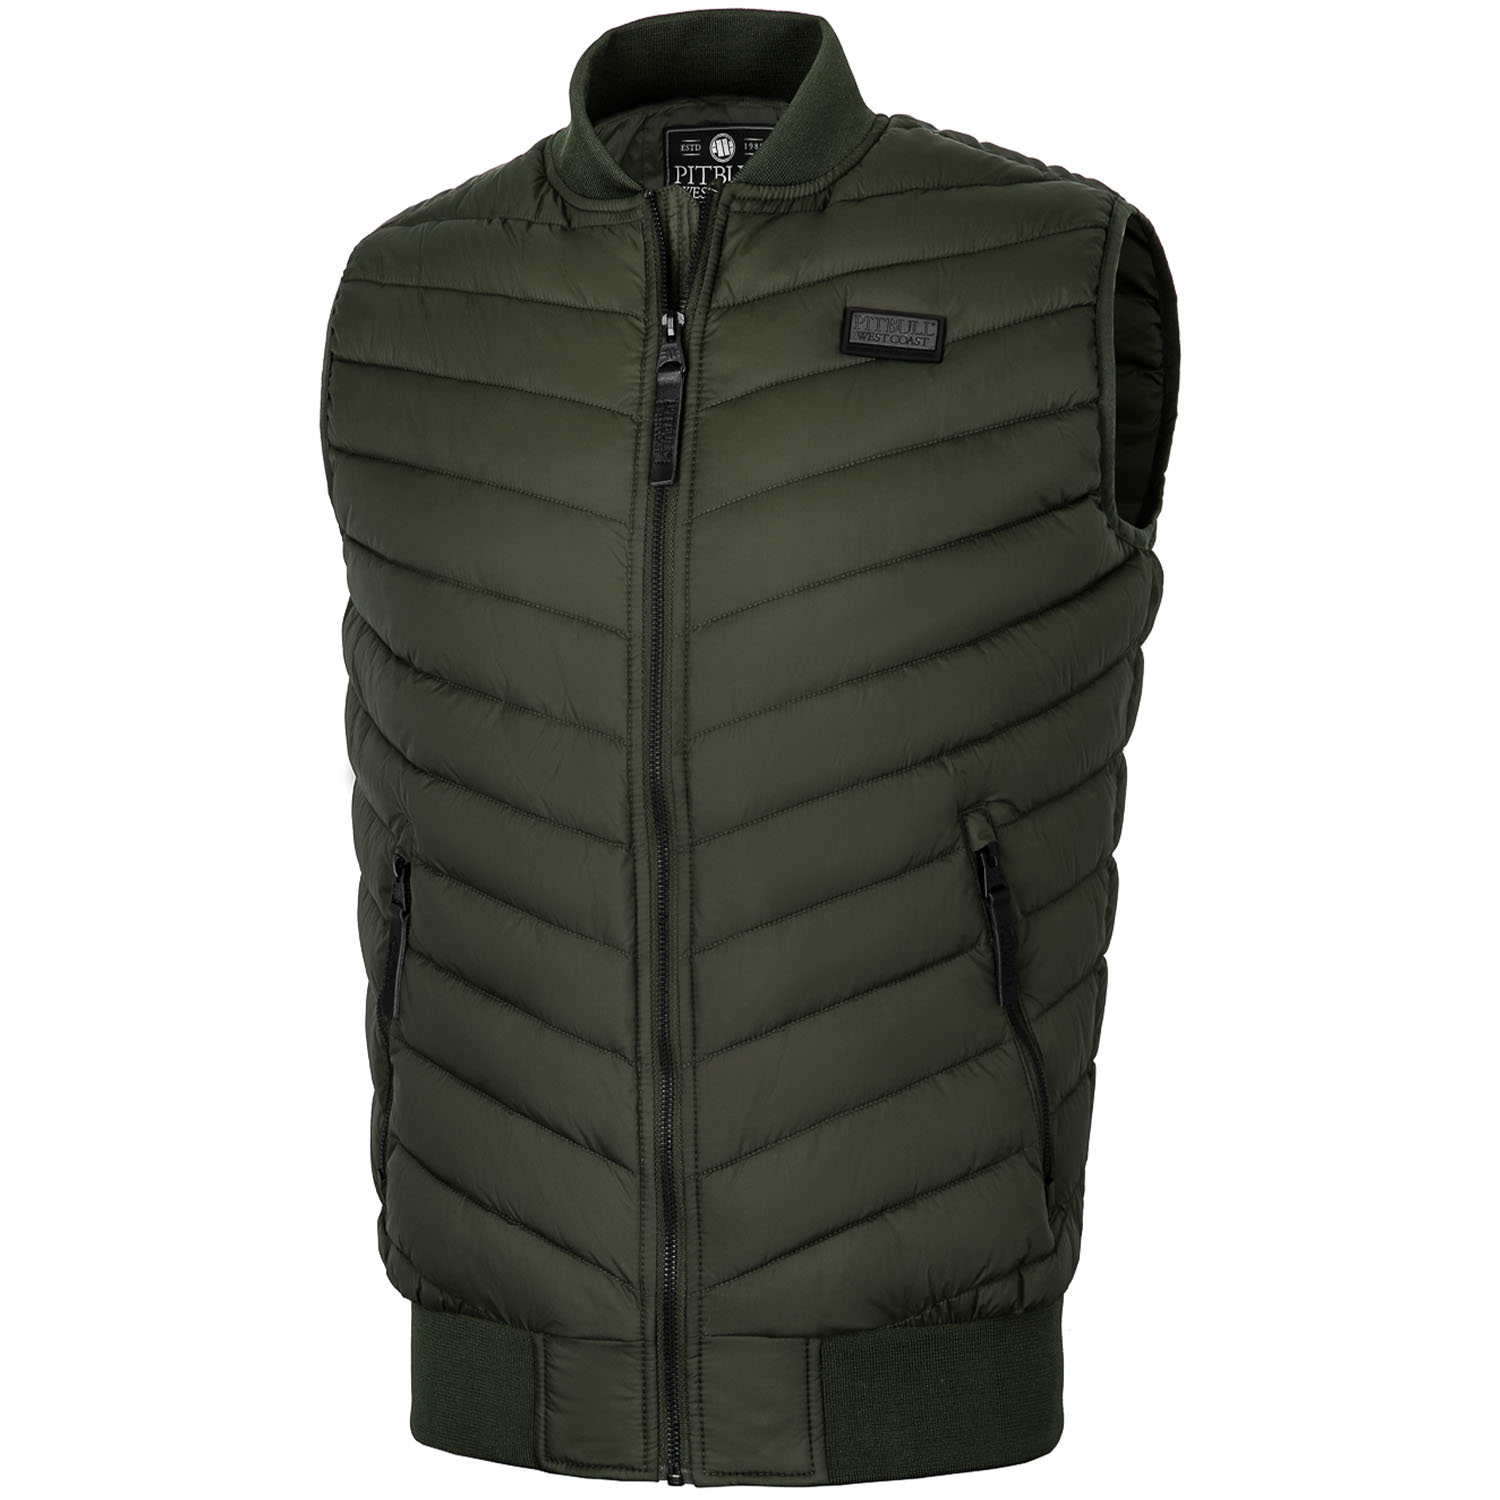 Pit Bull West Coast Weste, Quilted Halley, olive, S